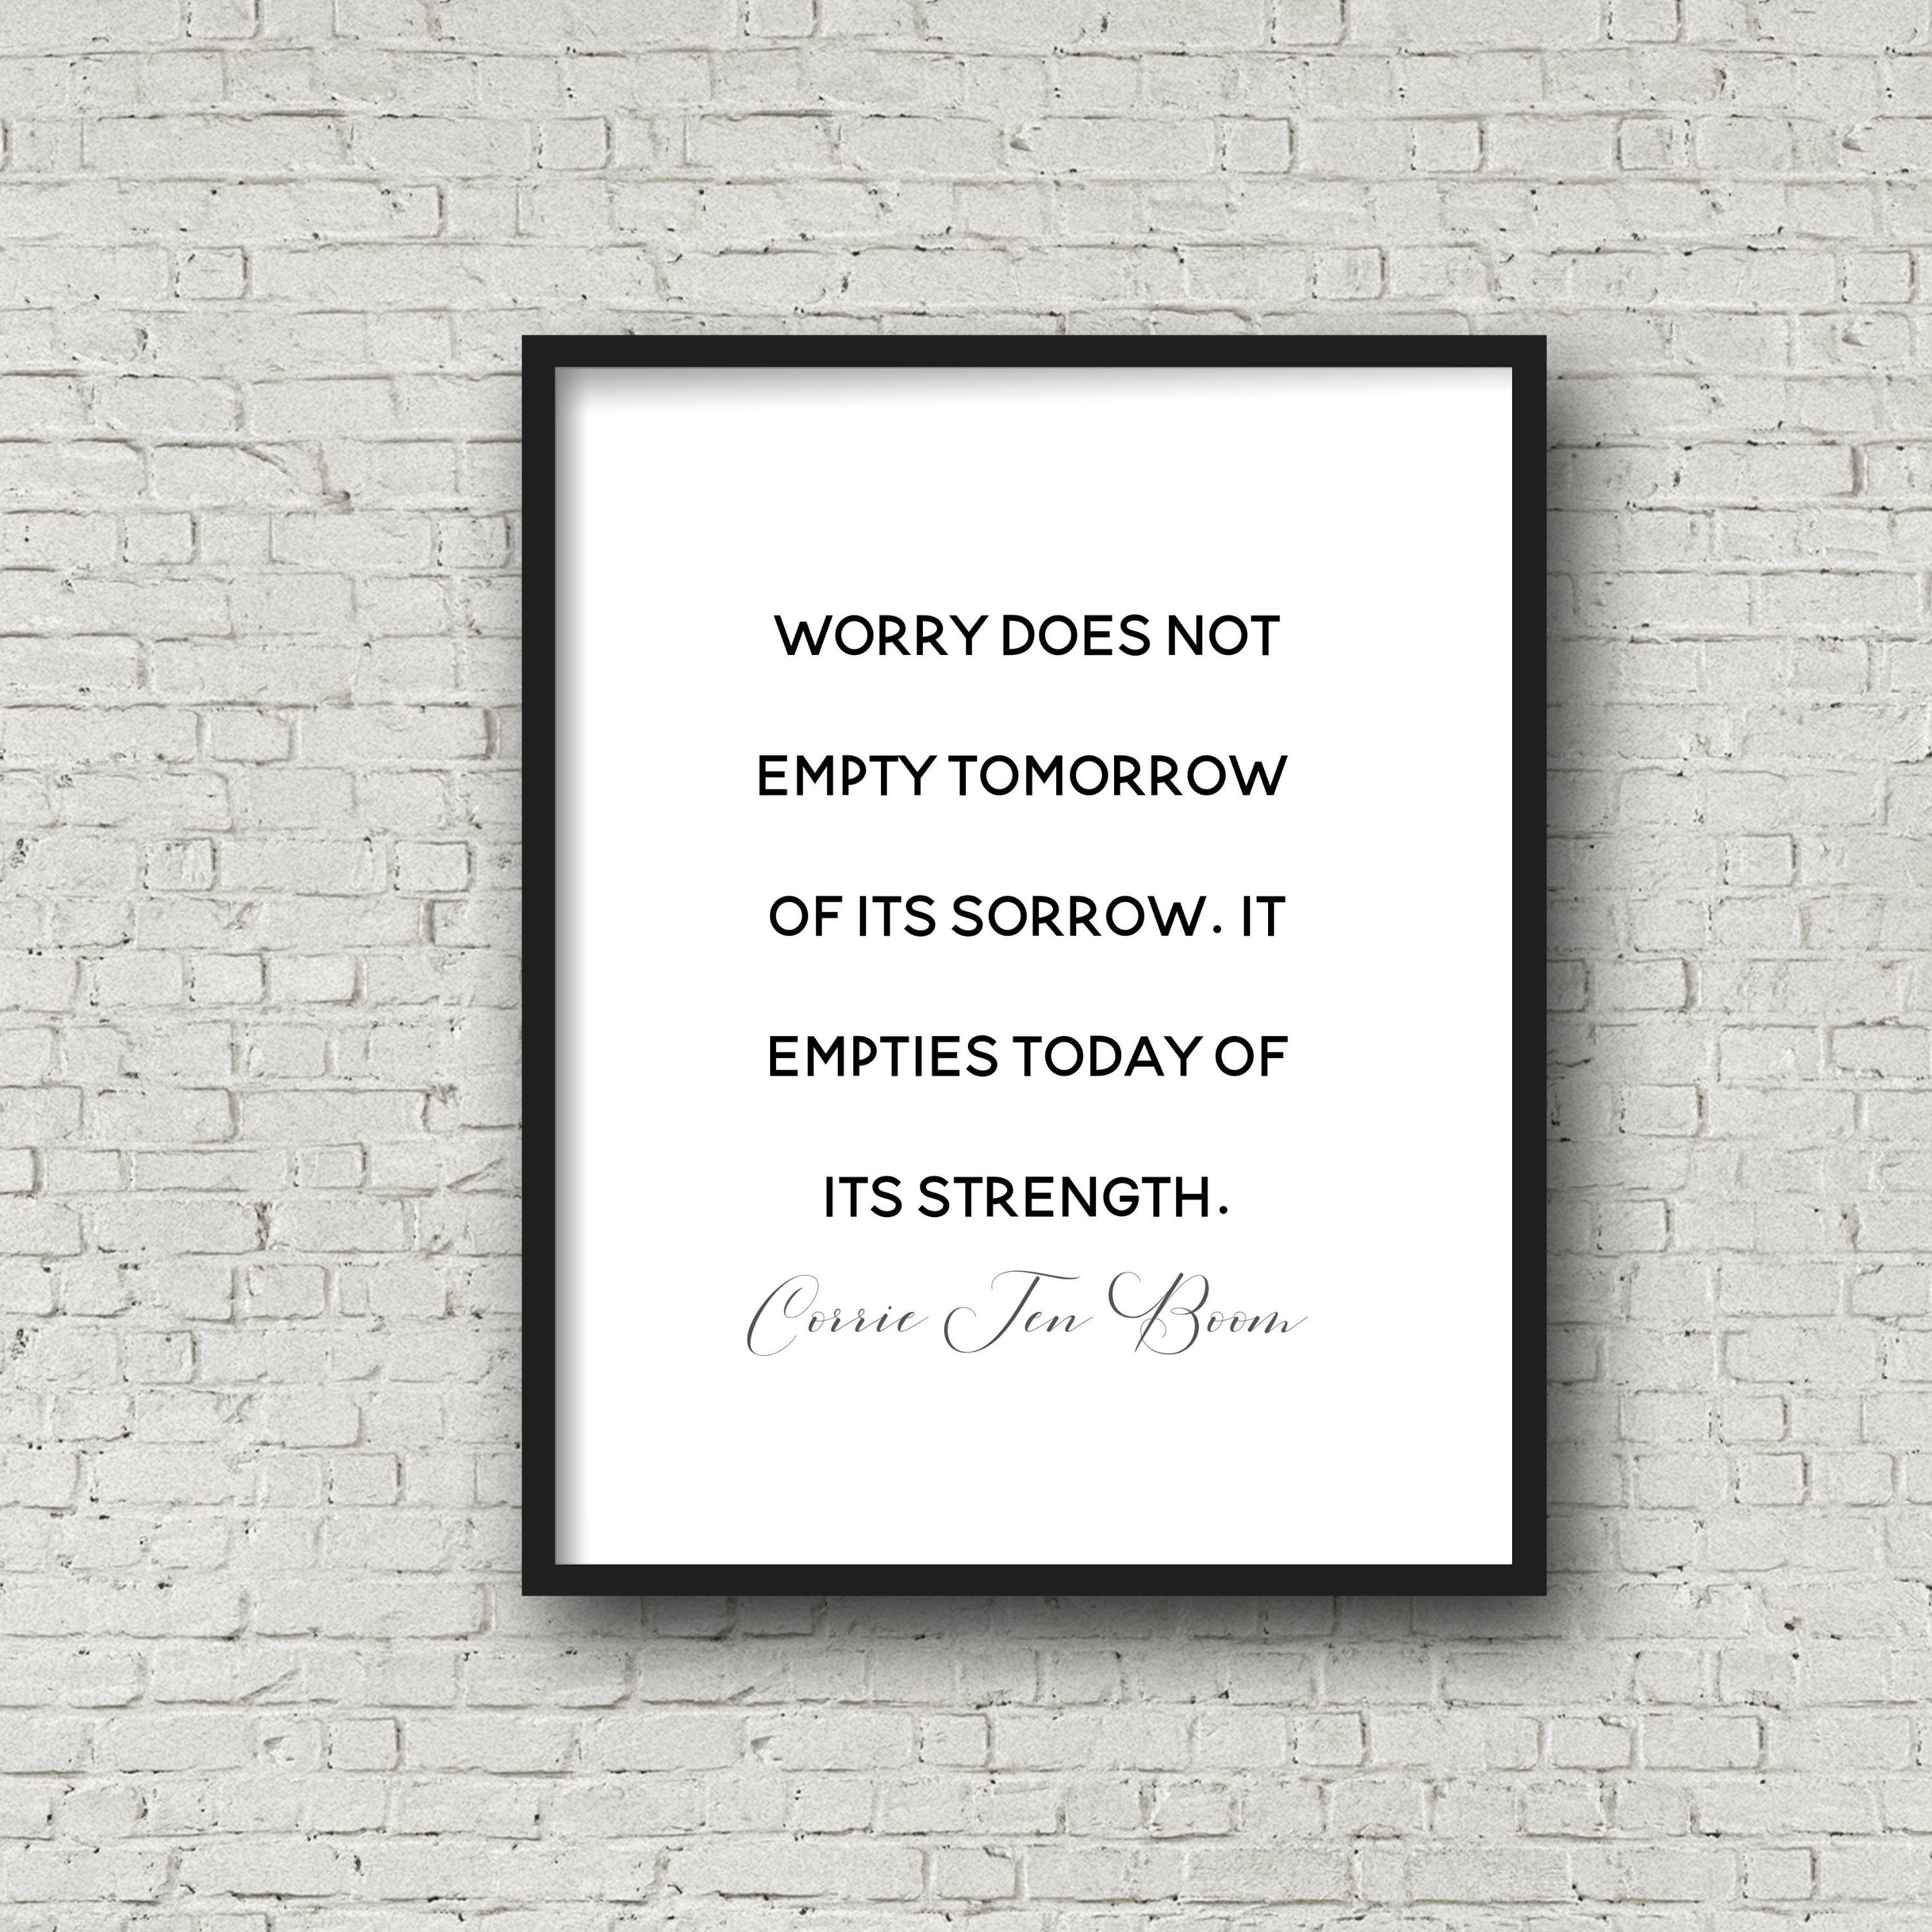 Corrie Ten Boom - Worry does not empty tomorrow of its